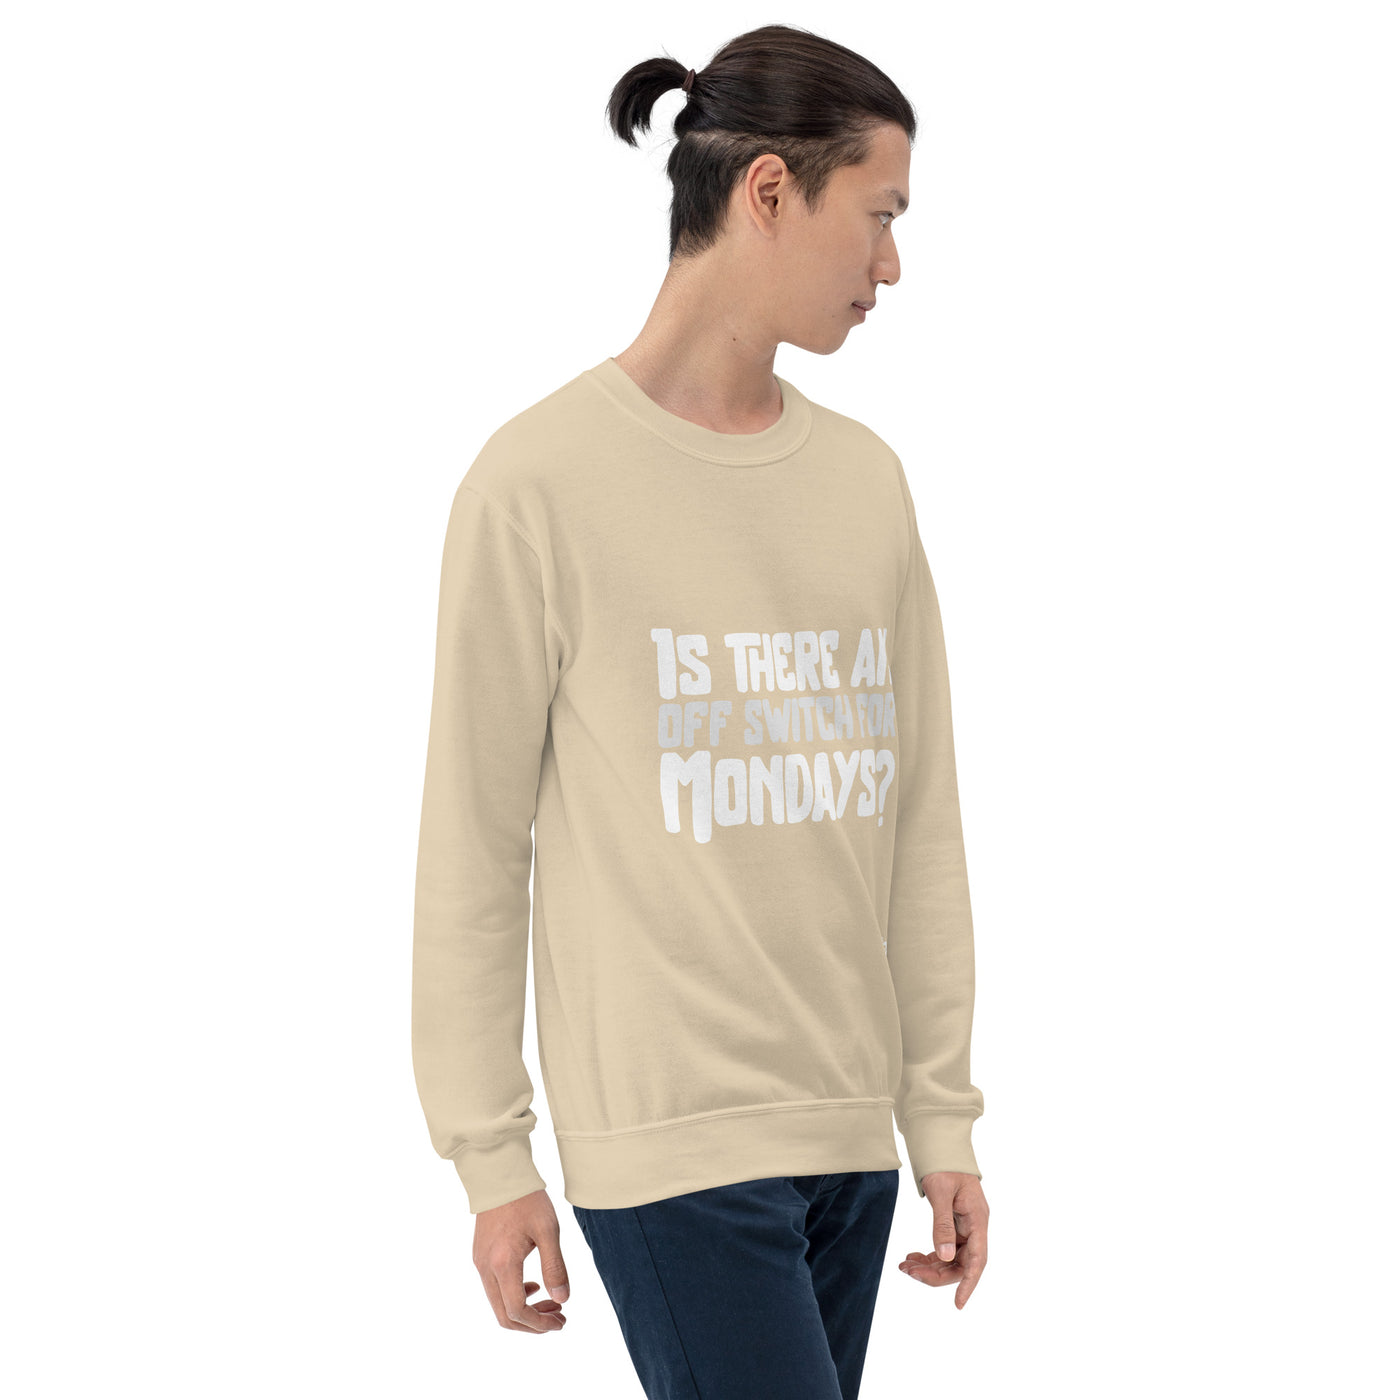 Is there an OFF switch for Mondays? - Unisex Sweatshirt